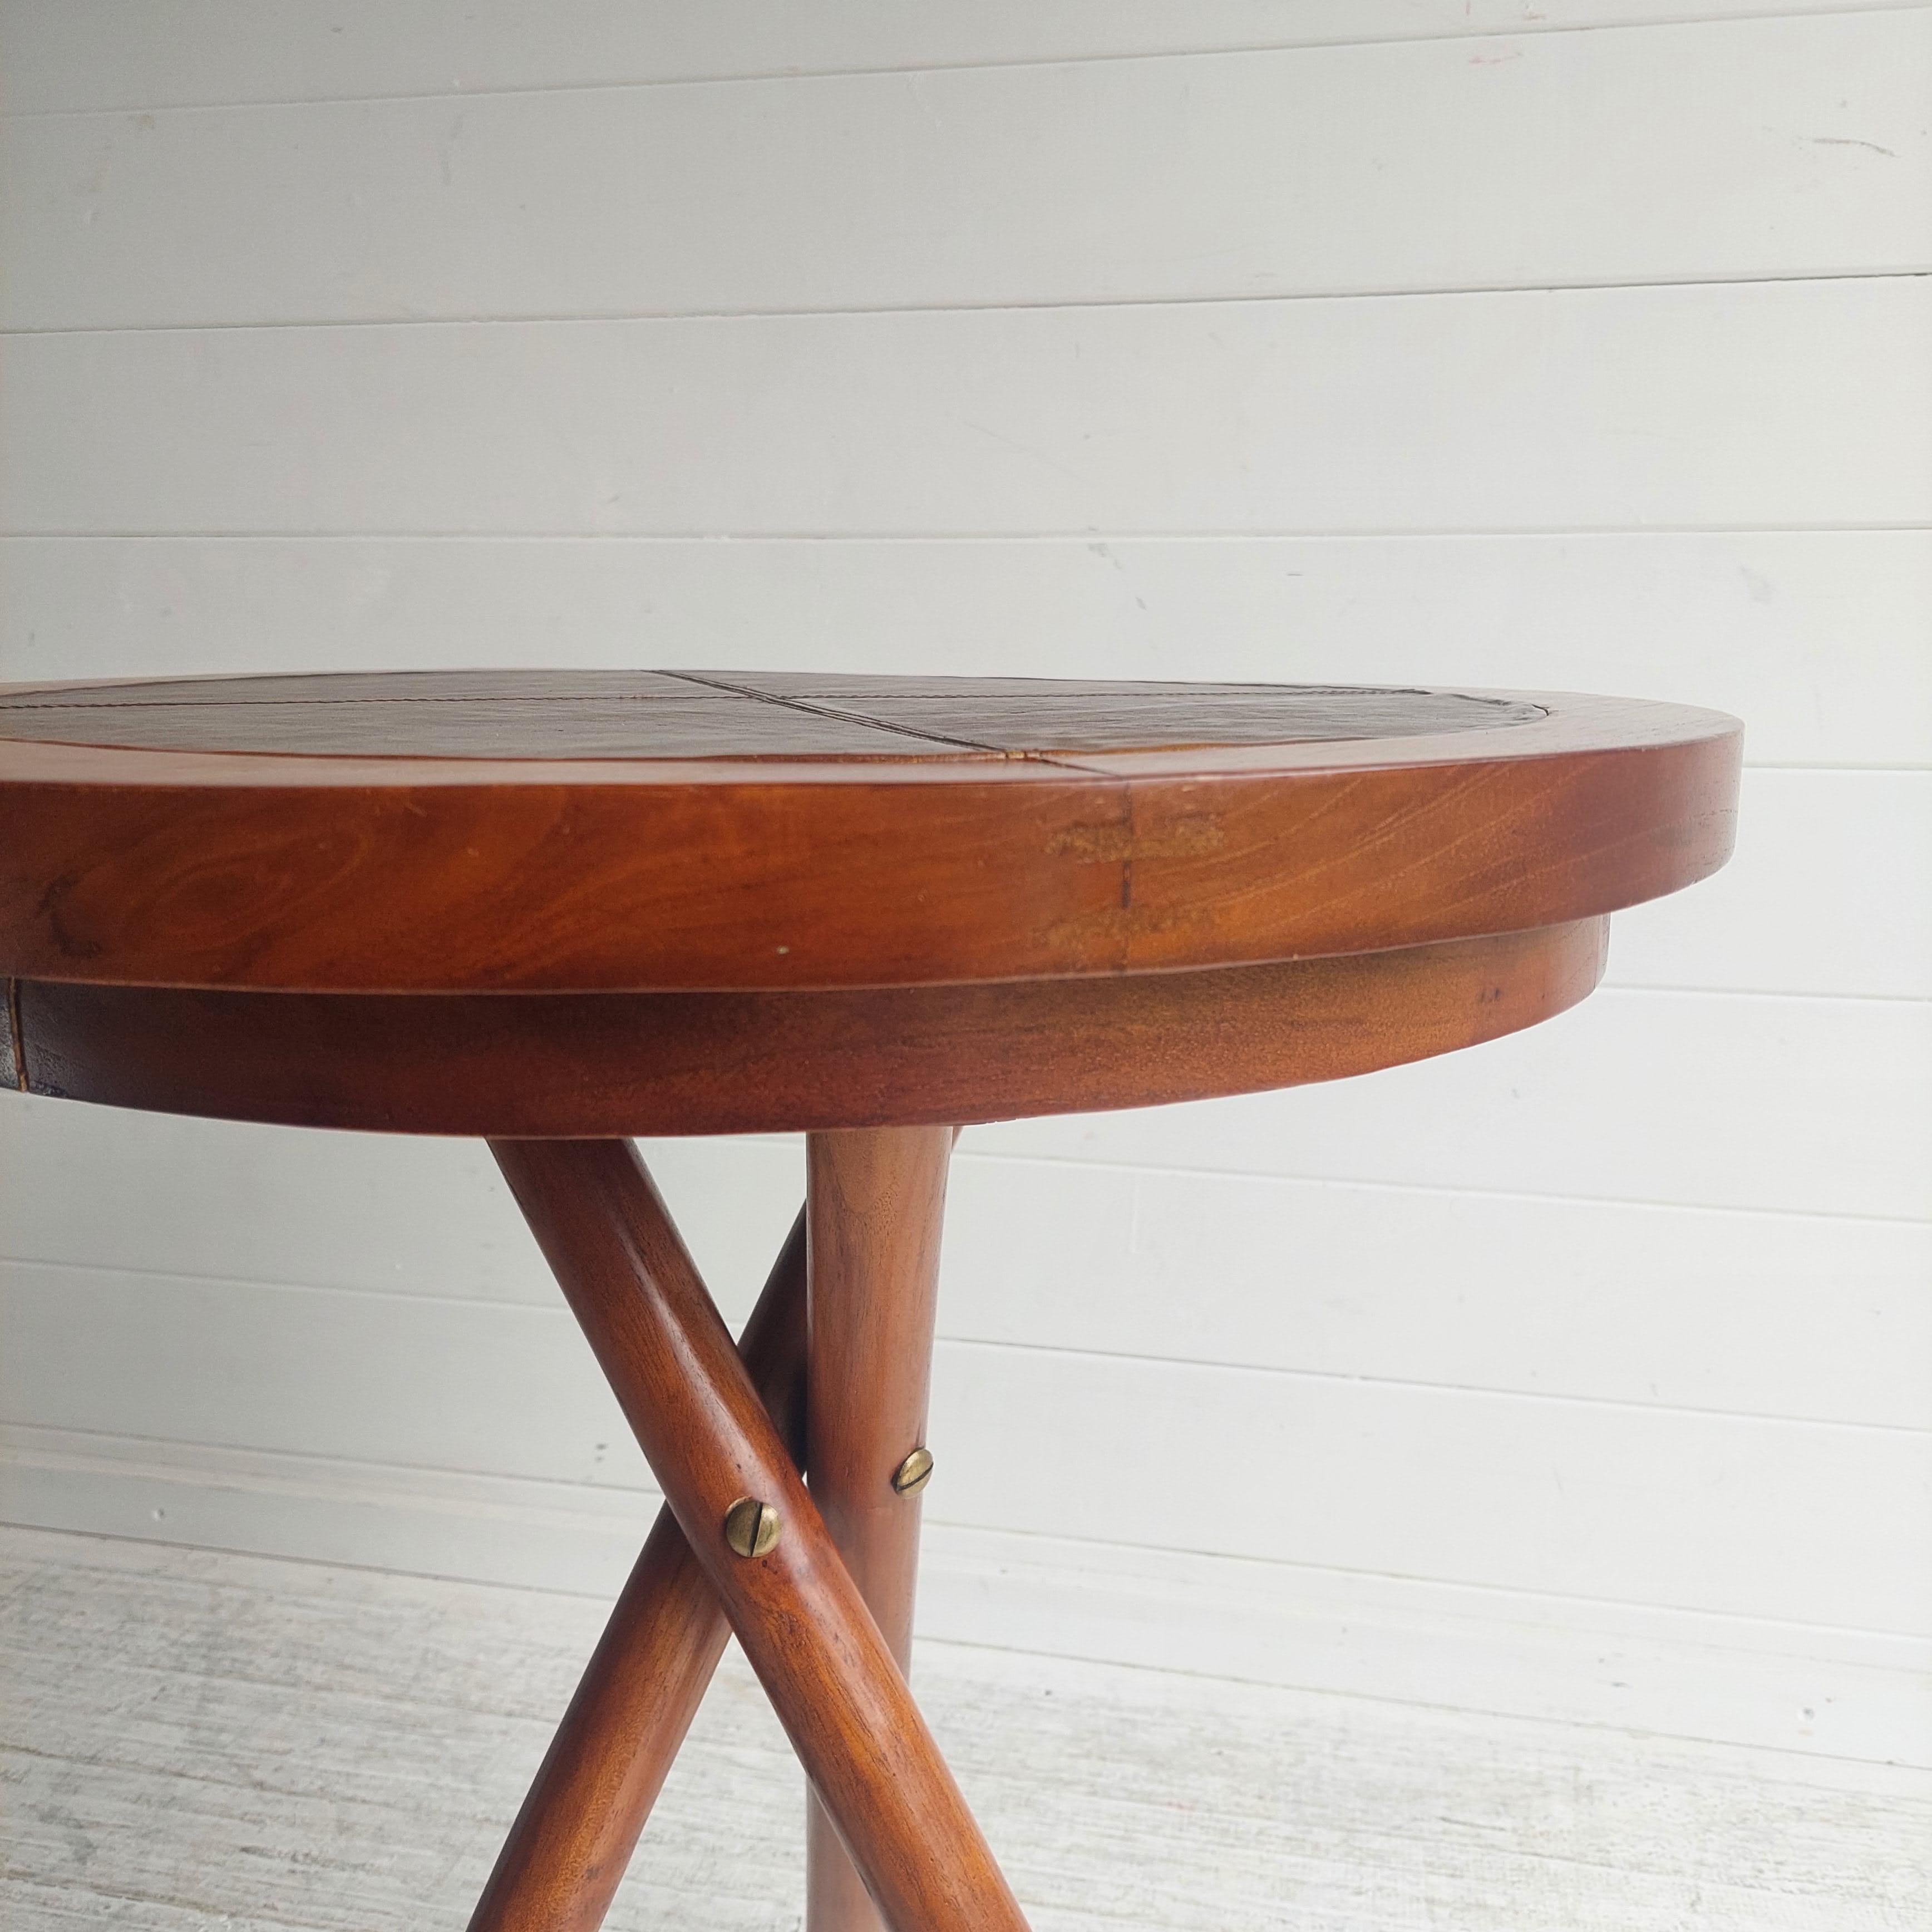 Early 20th Century /Midcentury round Campaign  handmade side table
A lovely late early 20th century, very understated, side table

Teak  Table similar to the style of Nils Trautner for ARY Nybro, Sweden, 1960s

The Campaign Teak and Leather style